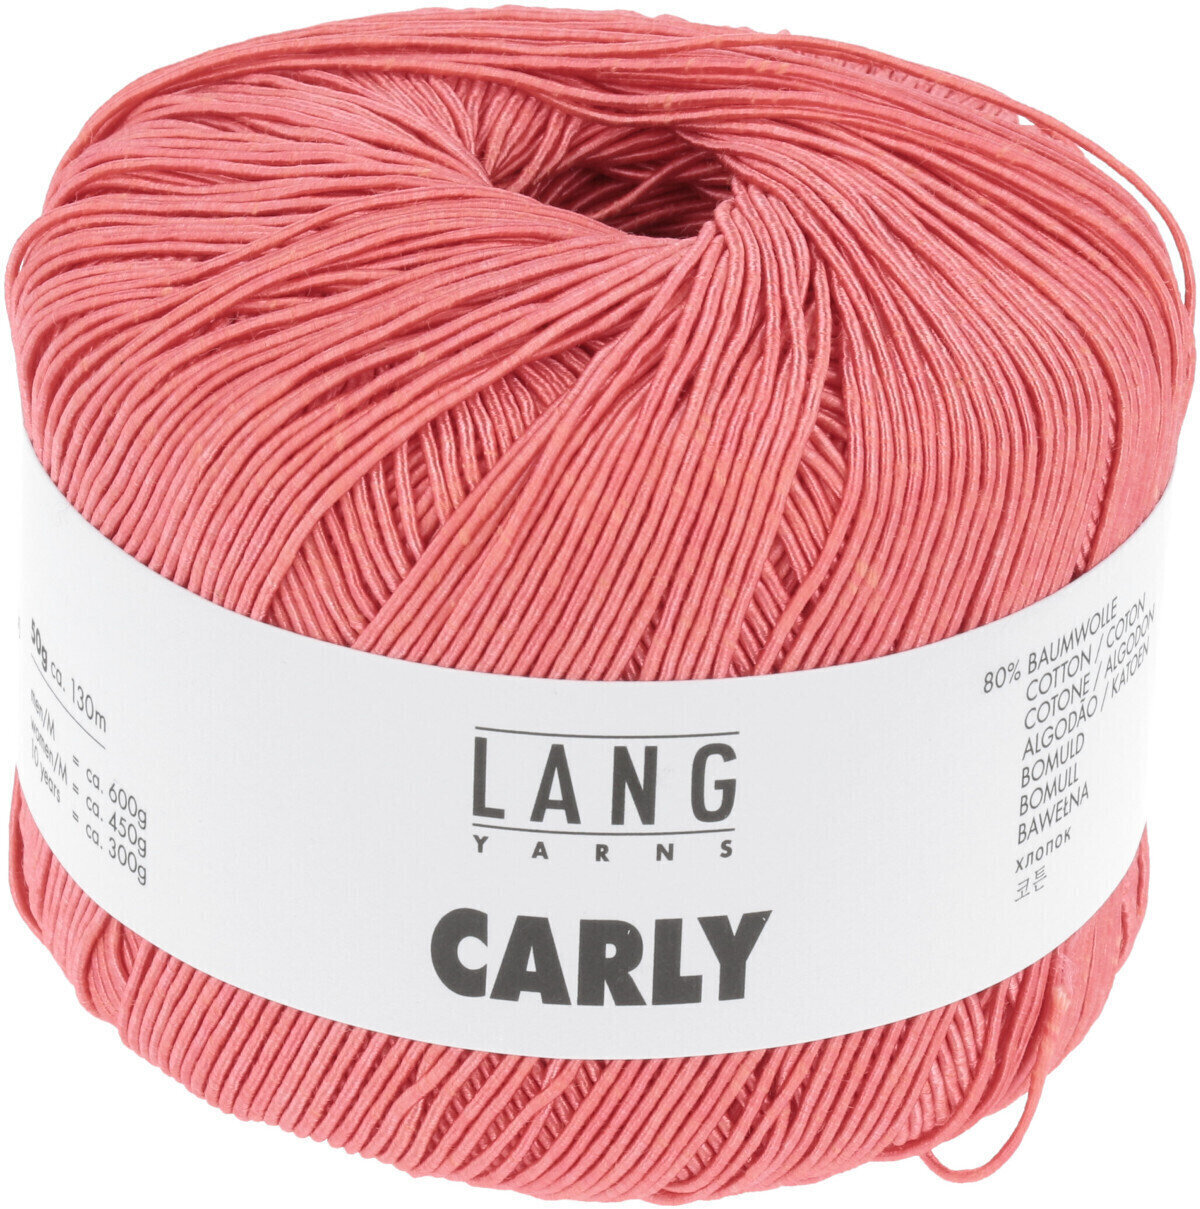 Fire de tricotat Lang Yarns Carly 0027 Coral